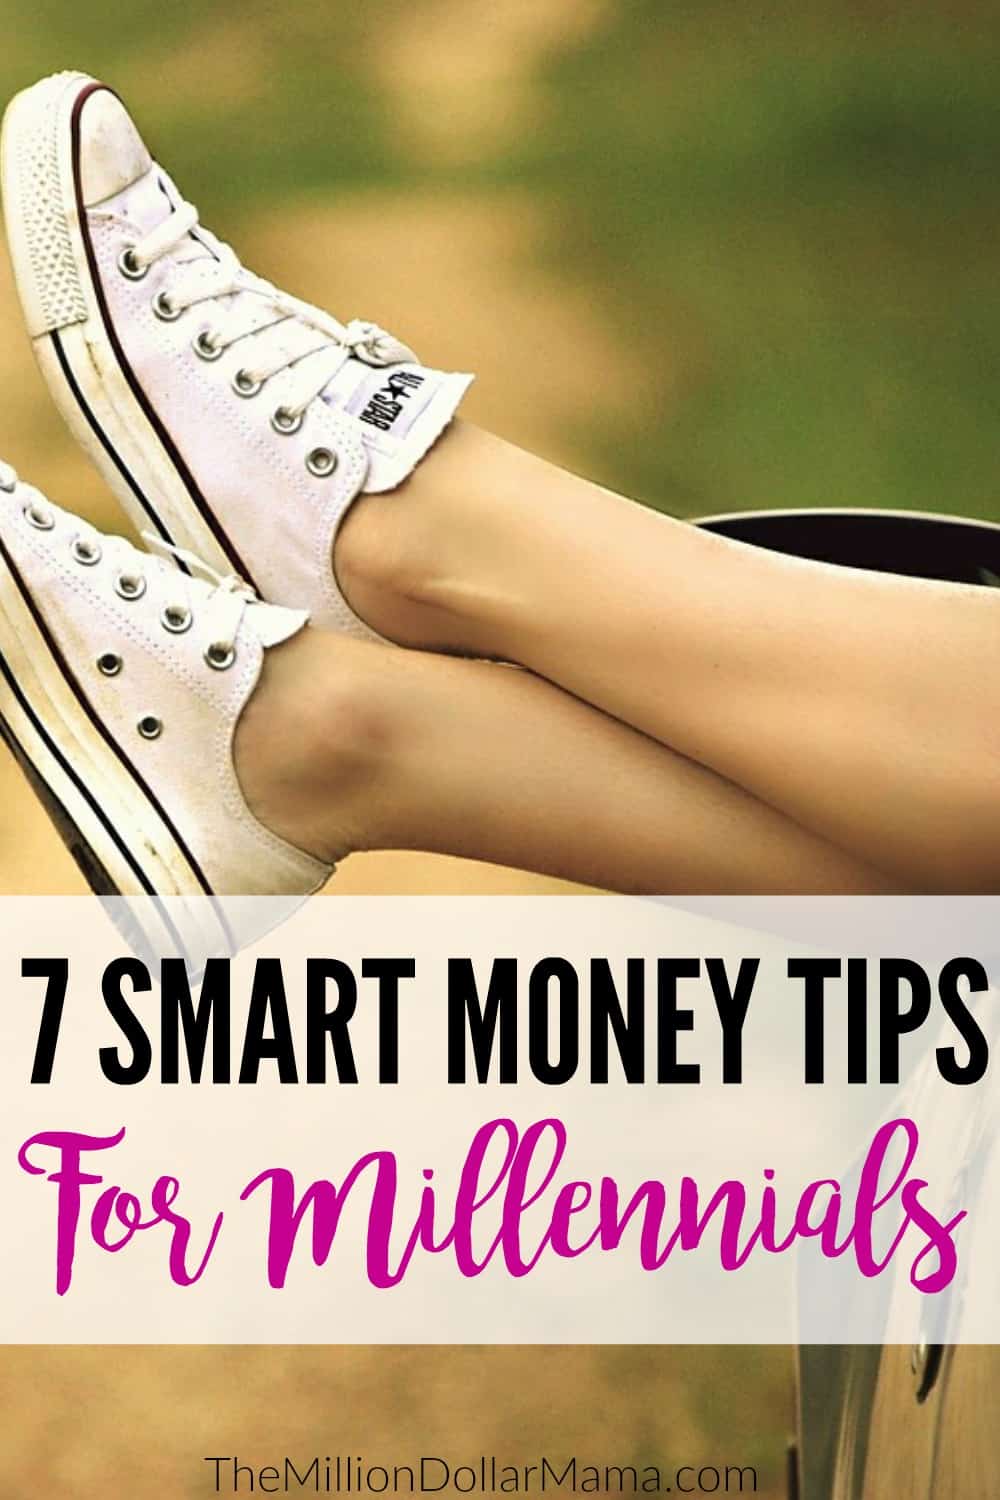 Money tips for millennials! These smart money tips will help set you up for financial success.